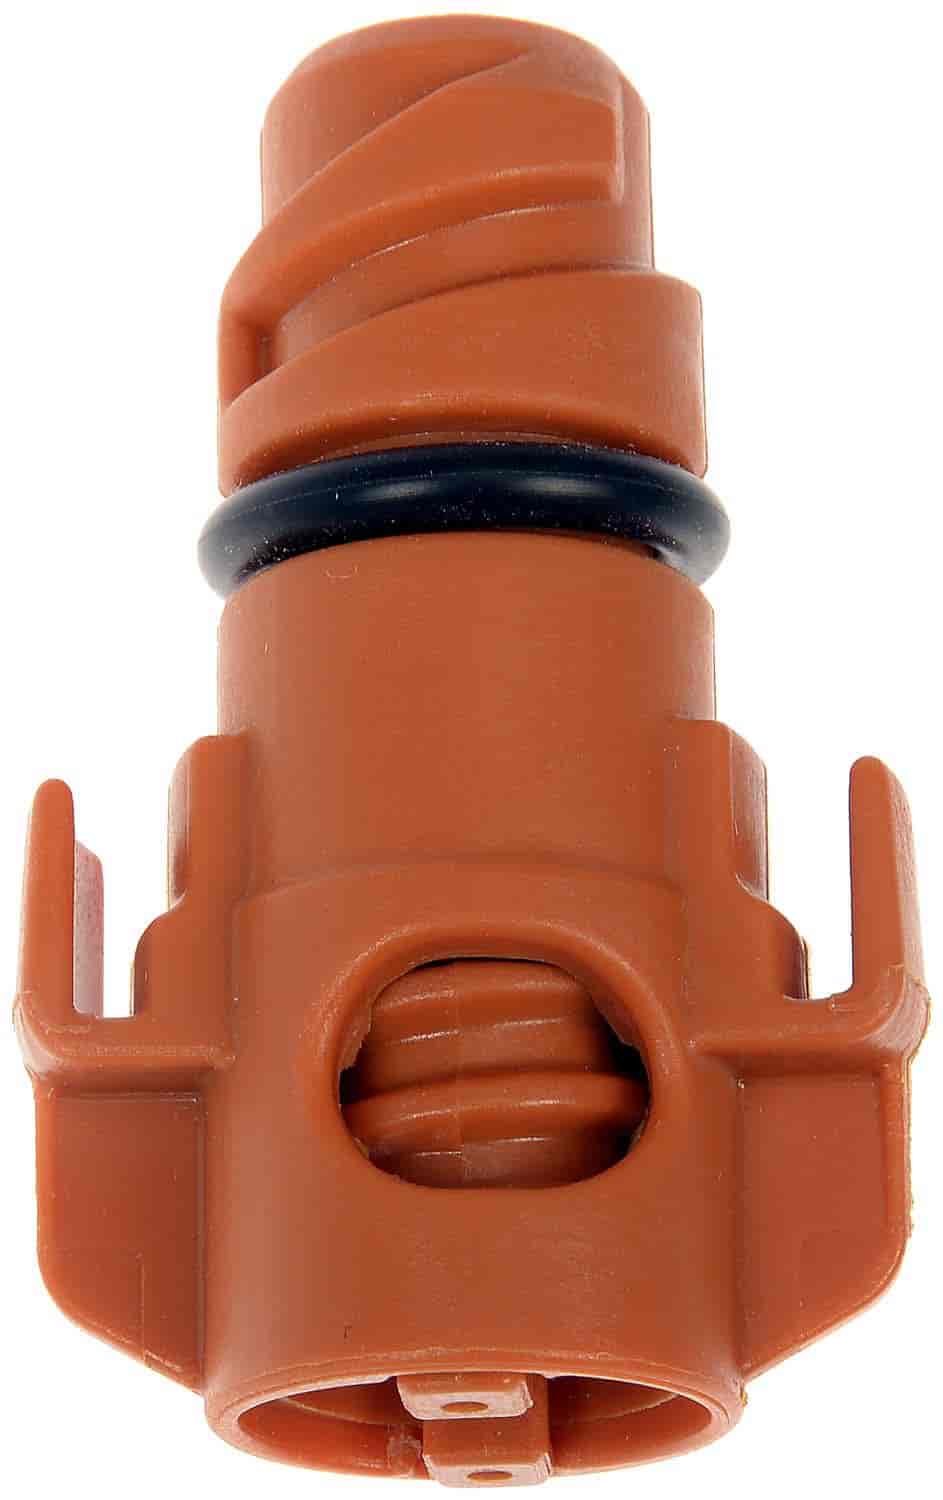 Thermoplastic Oil Drain Plug Fits Select Ford/Lincoln V6/V8